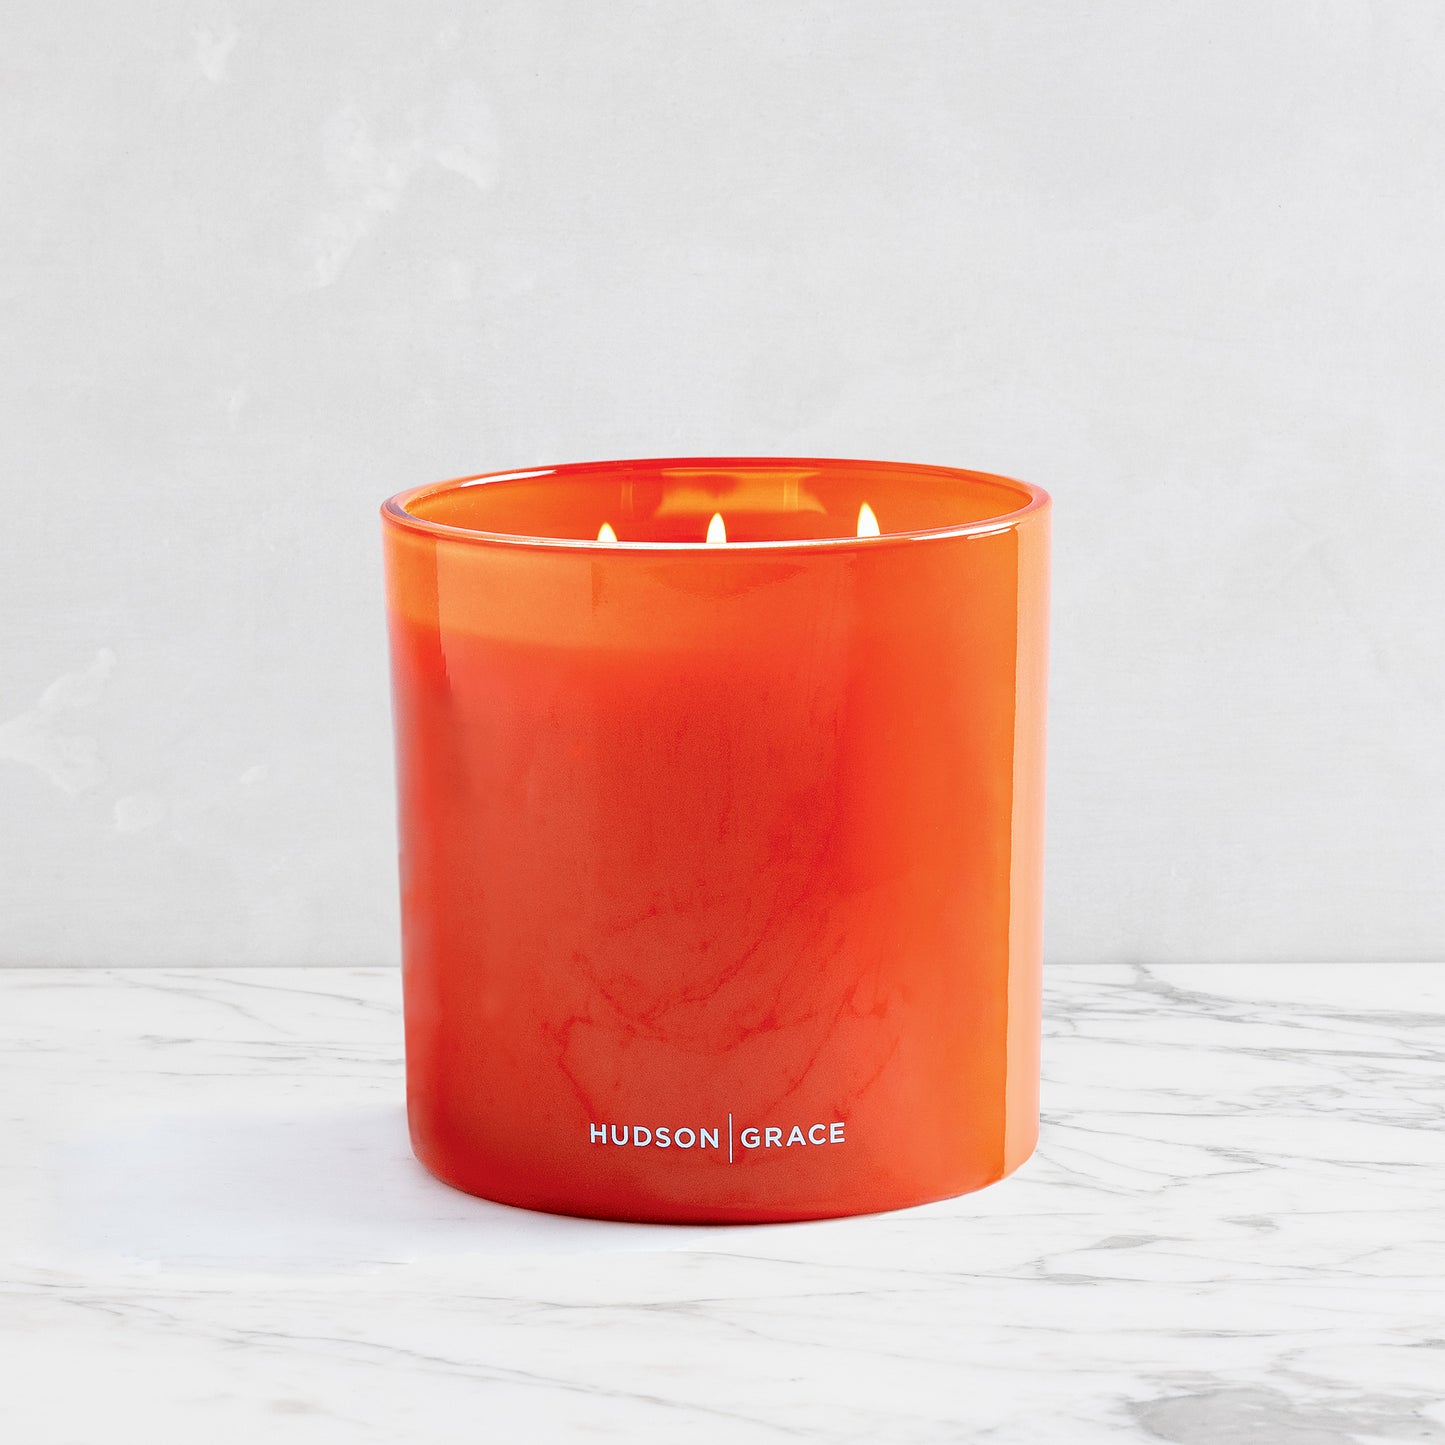 Hudson Grace Original Scented 3-Wick Candle